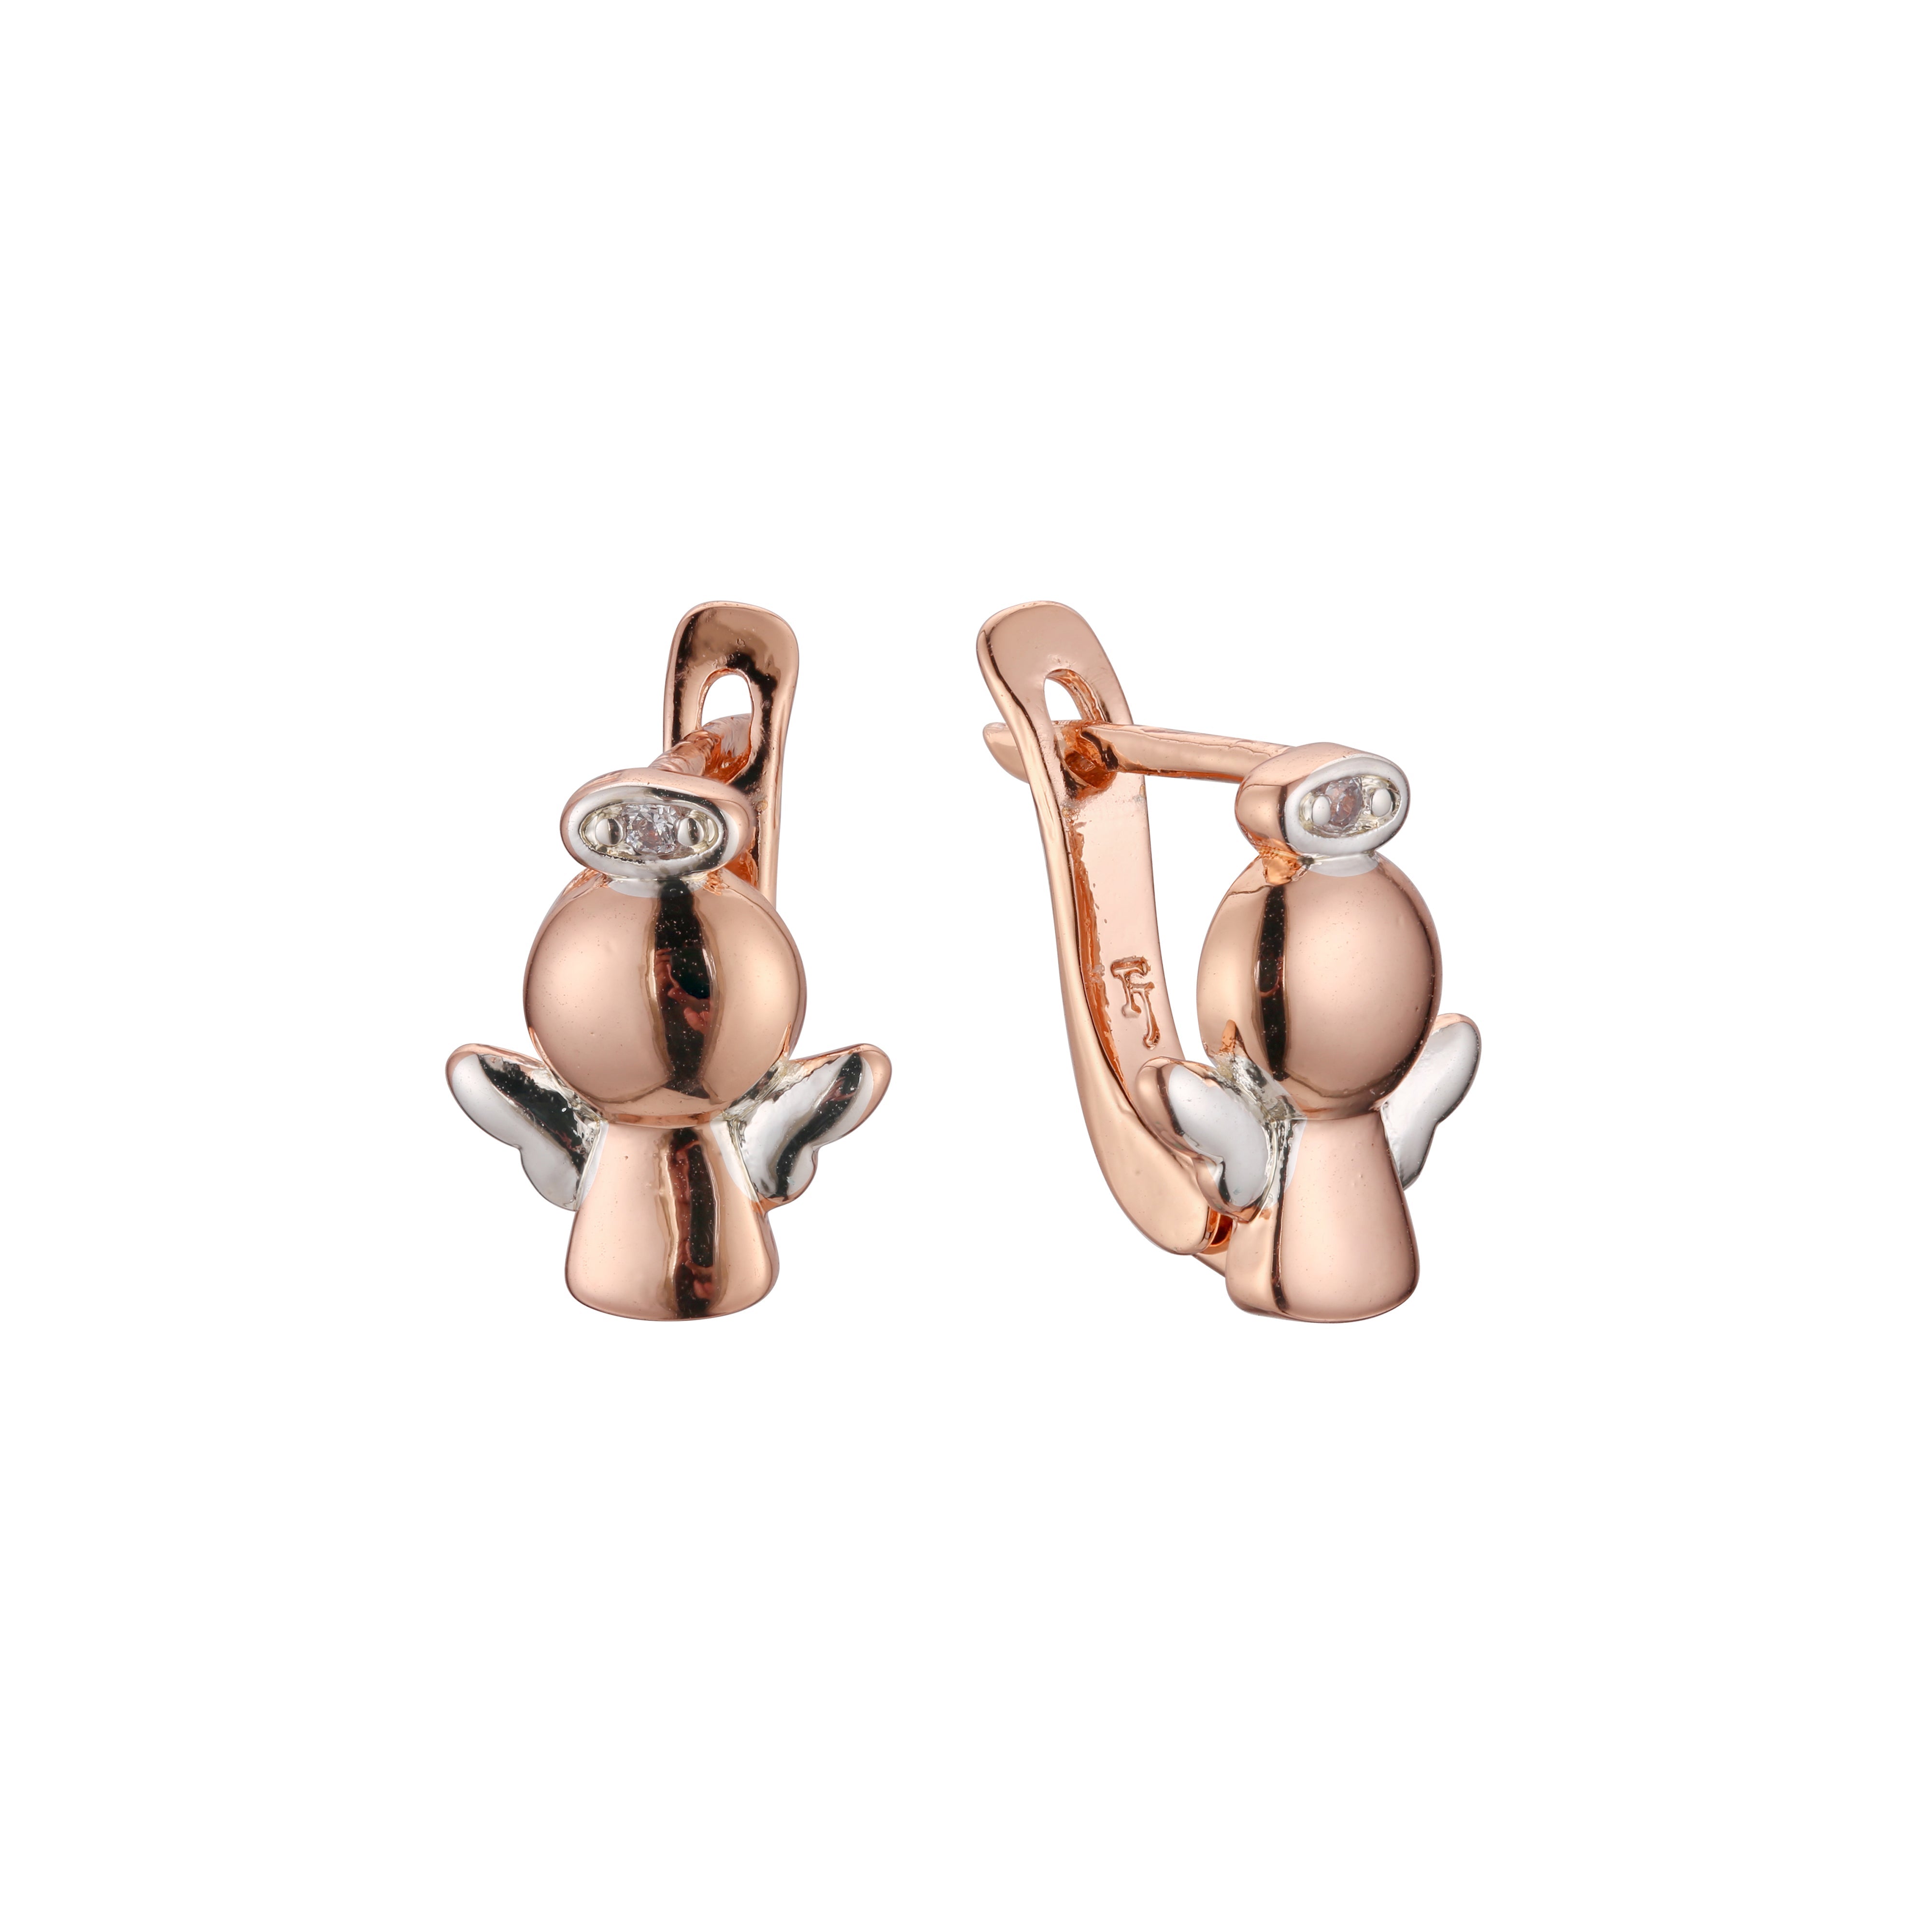 Baby angel child earrings in 14K Gold, Rose Gold, two tone plating colors